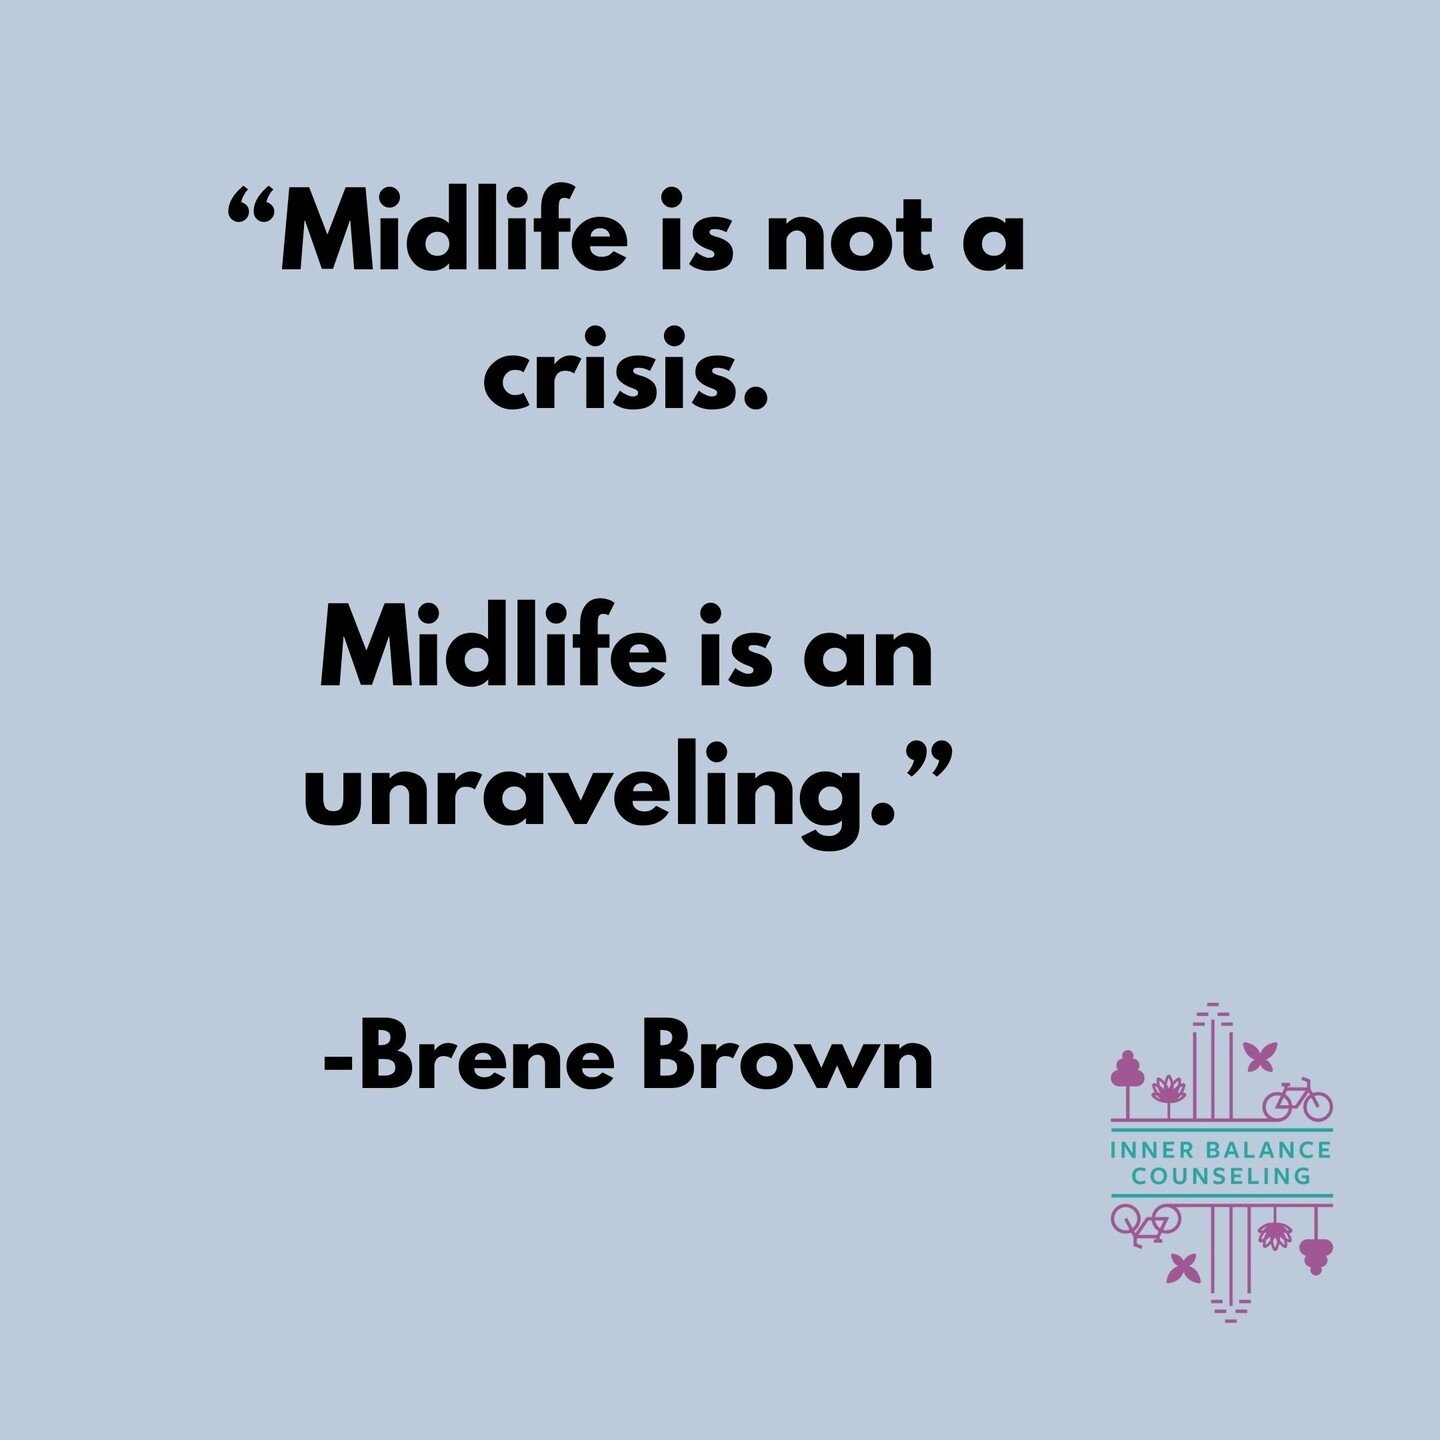 In her powerful piece, @BreneBrown dives into the messy, beautiful journey of self-discovery and growth. It's okay to feel lost, to question, to shed old skin. It's in these moments of unraveling that we find our true selves. Let's lean into vulnerab